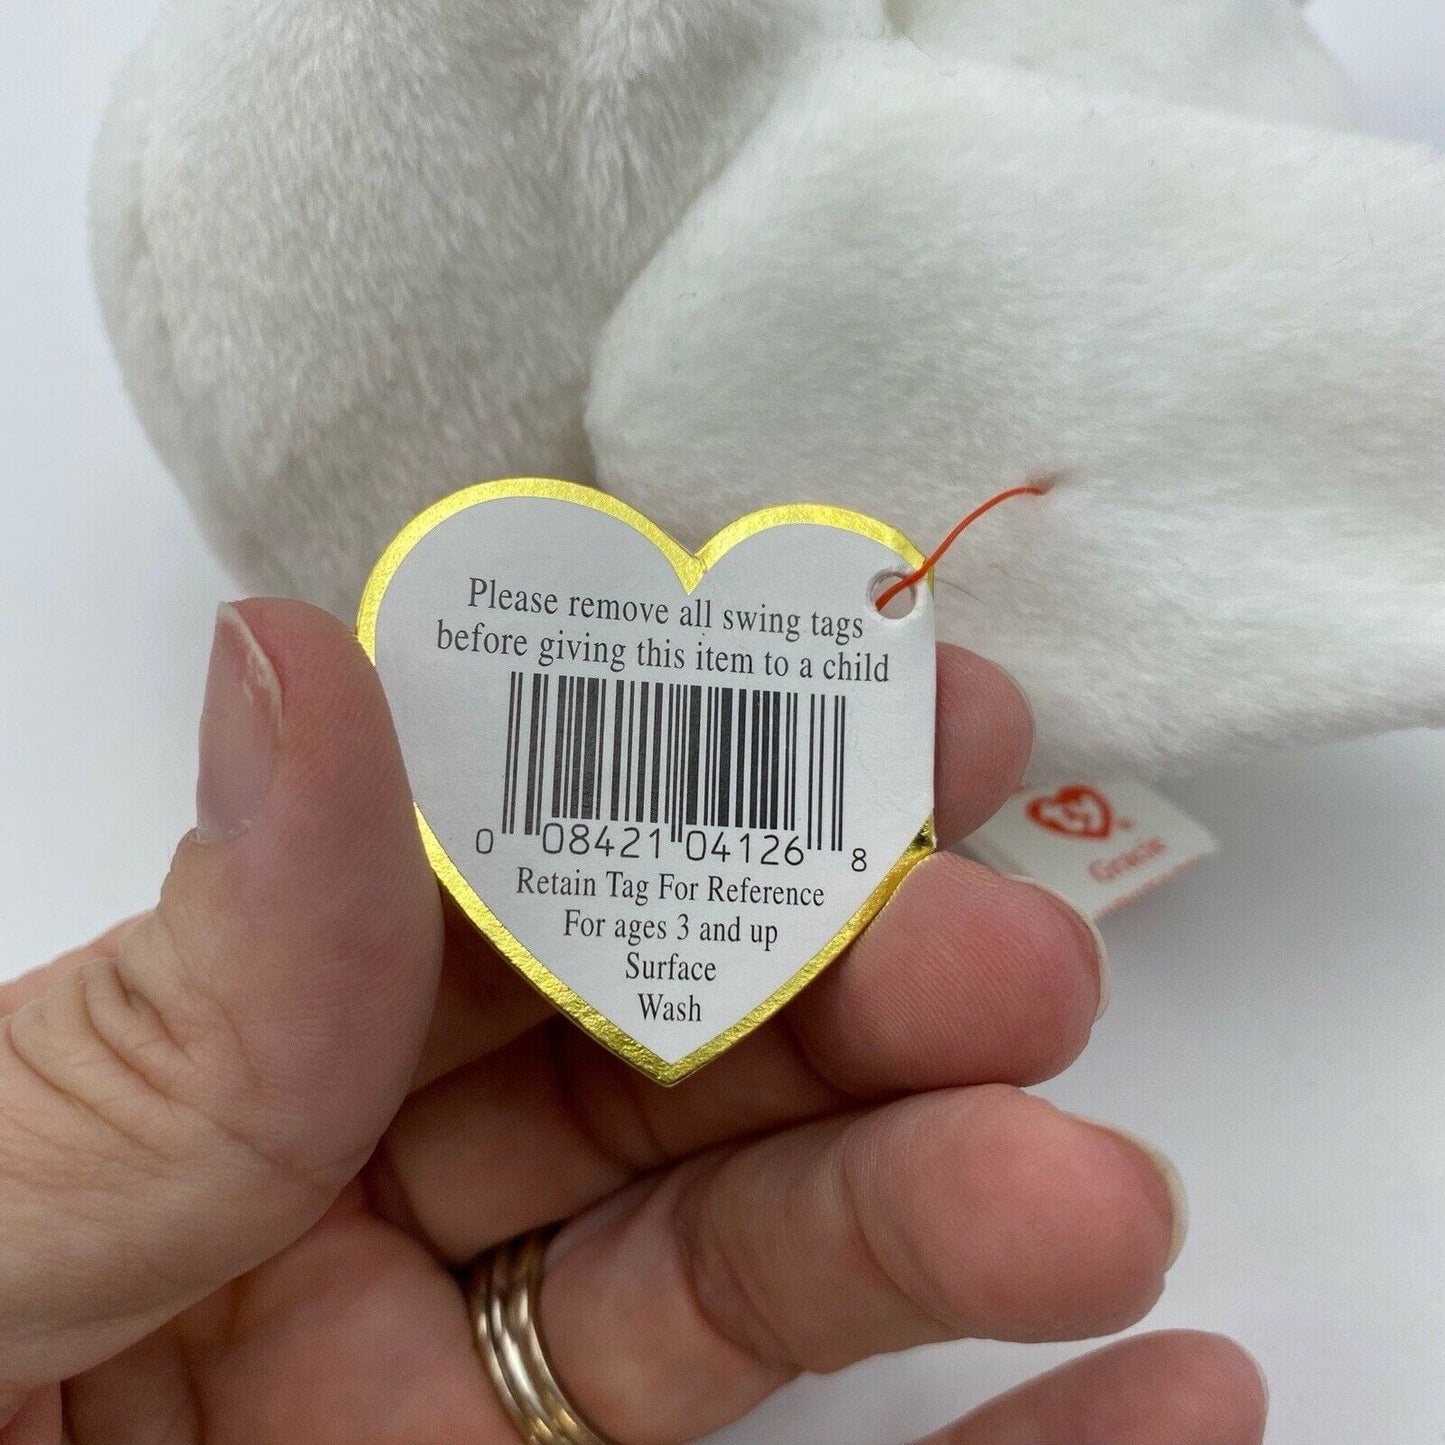 Ty Original Beanie Babies “Gracie” The Swan 1996 MINT Condition - Tag Errors